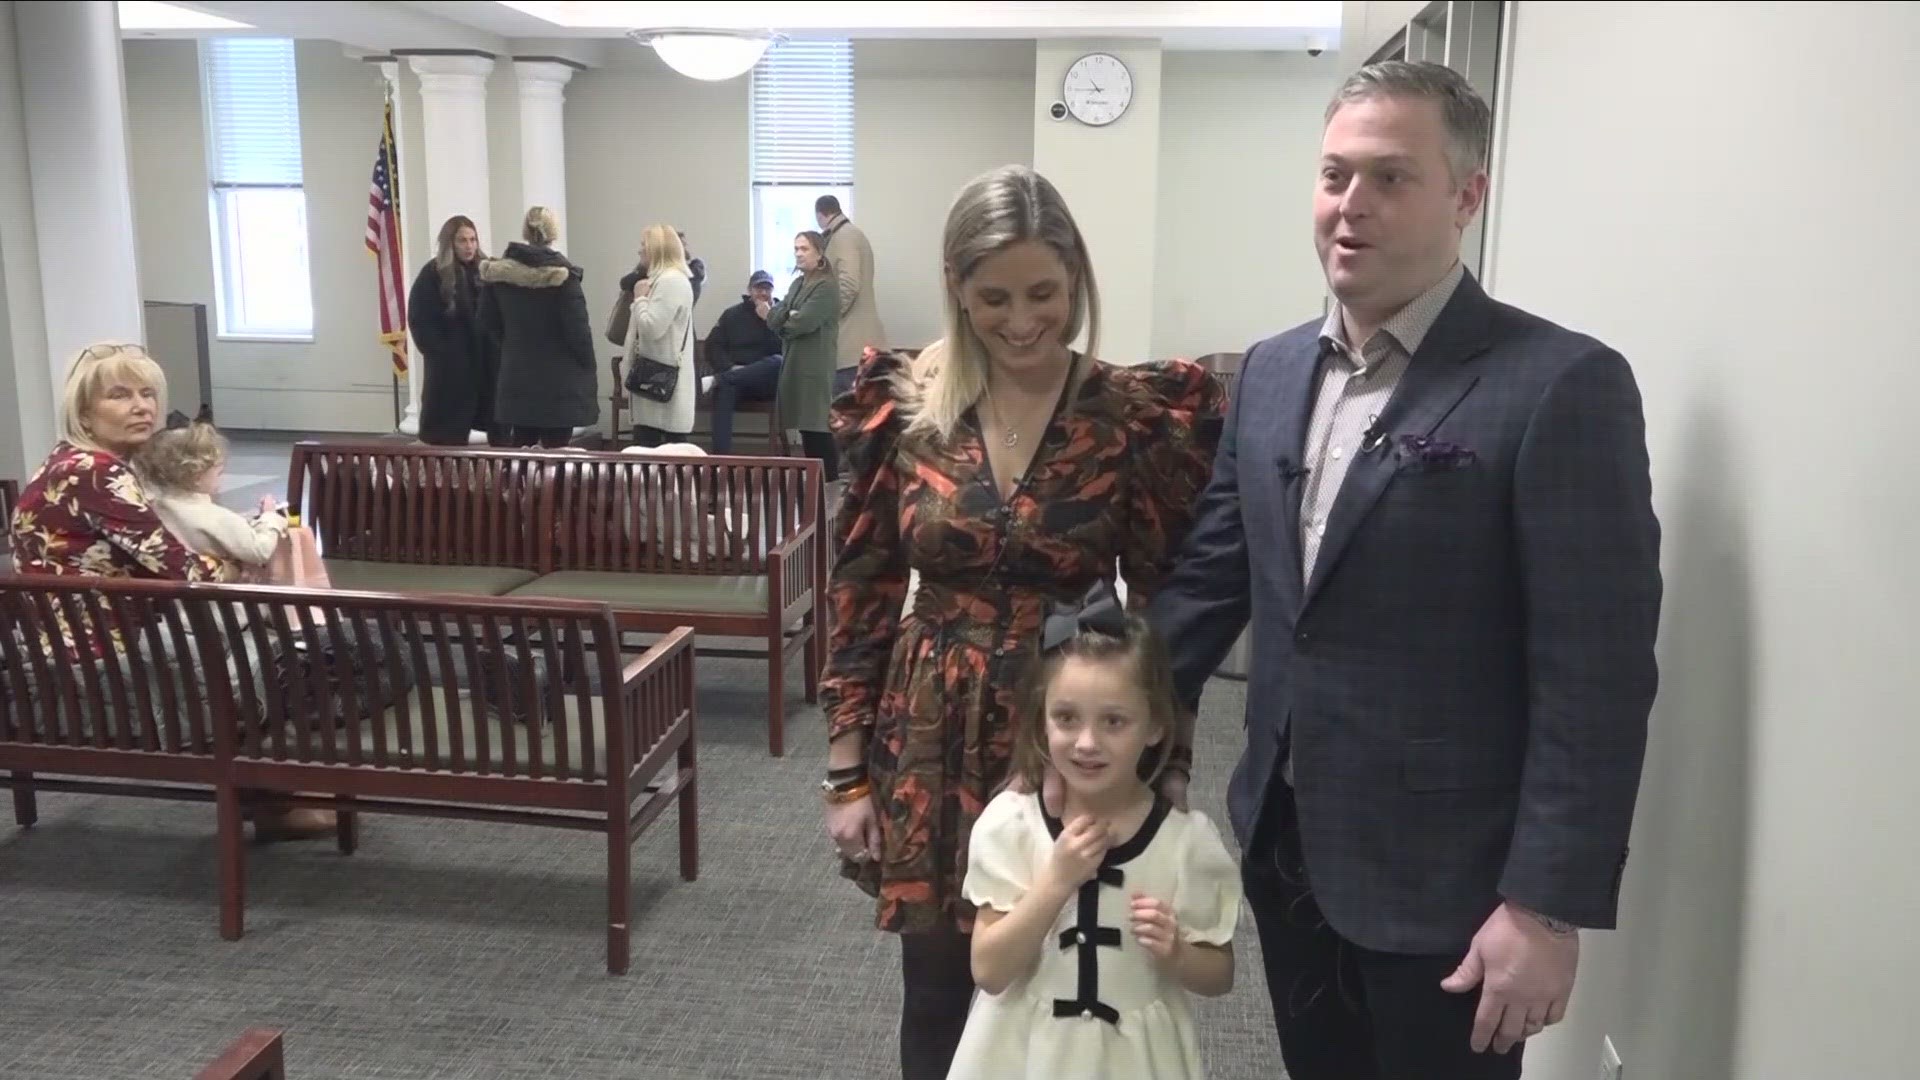 The Reich Jacobi Family became *foster parents of their niece in 20-19 and today ... they officially adopted her at family court